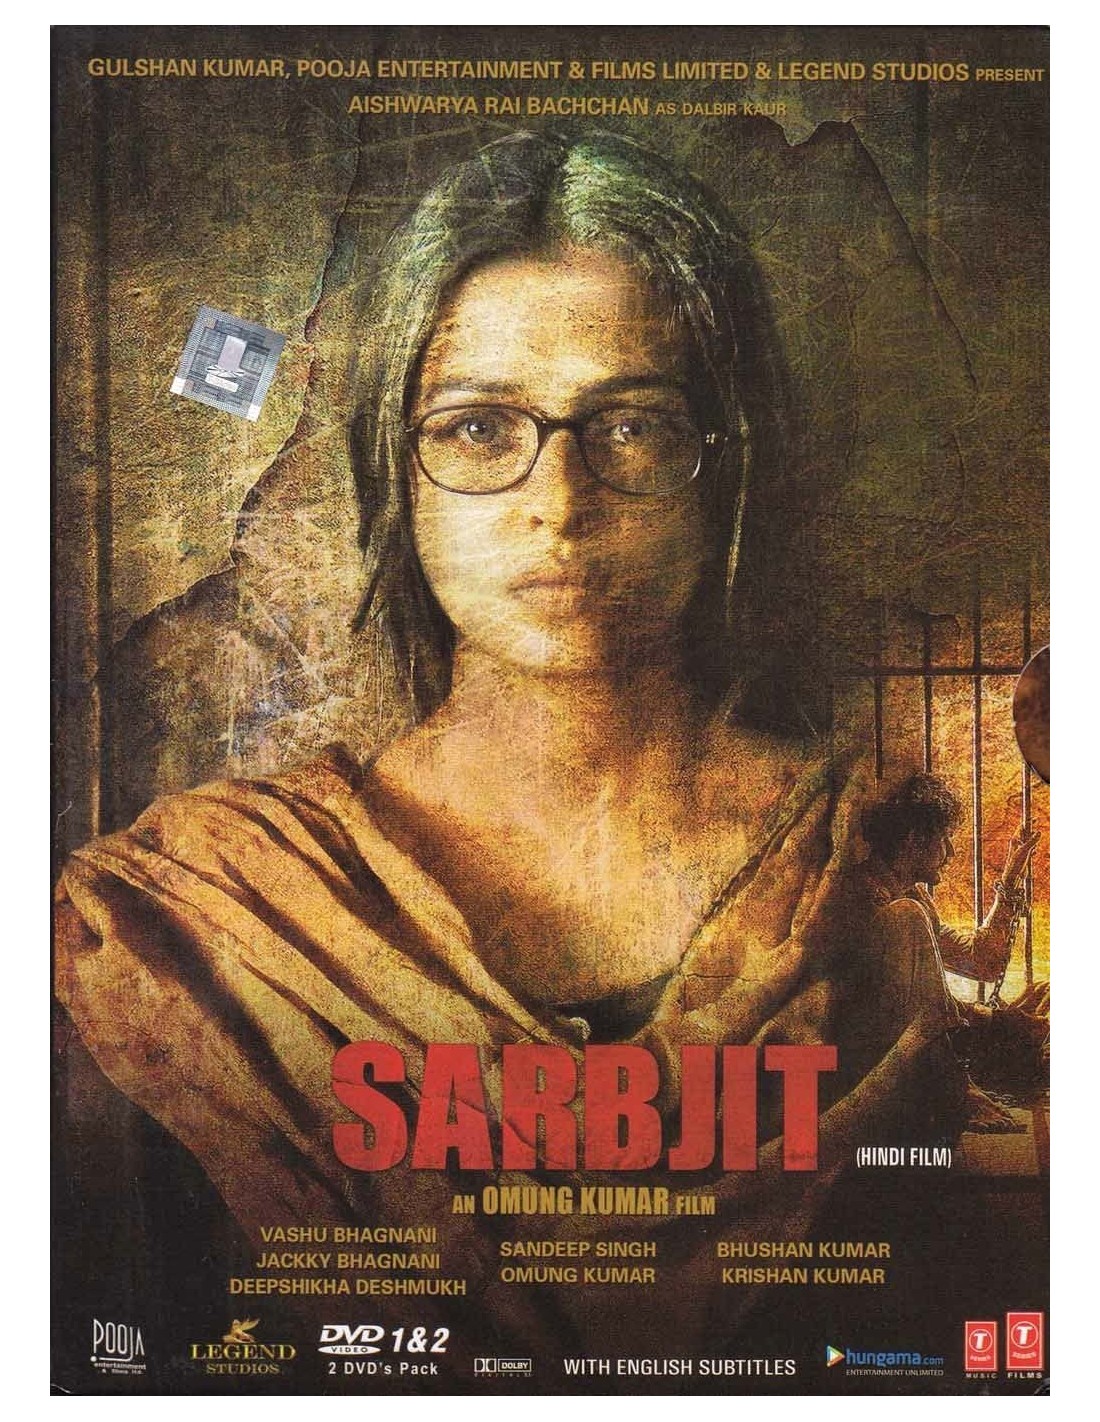 Sarbjit DVD (2016) | Available in French